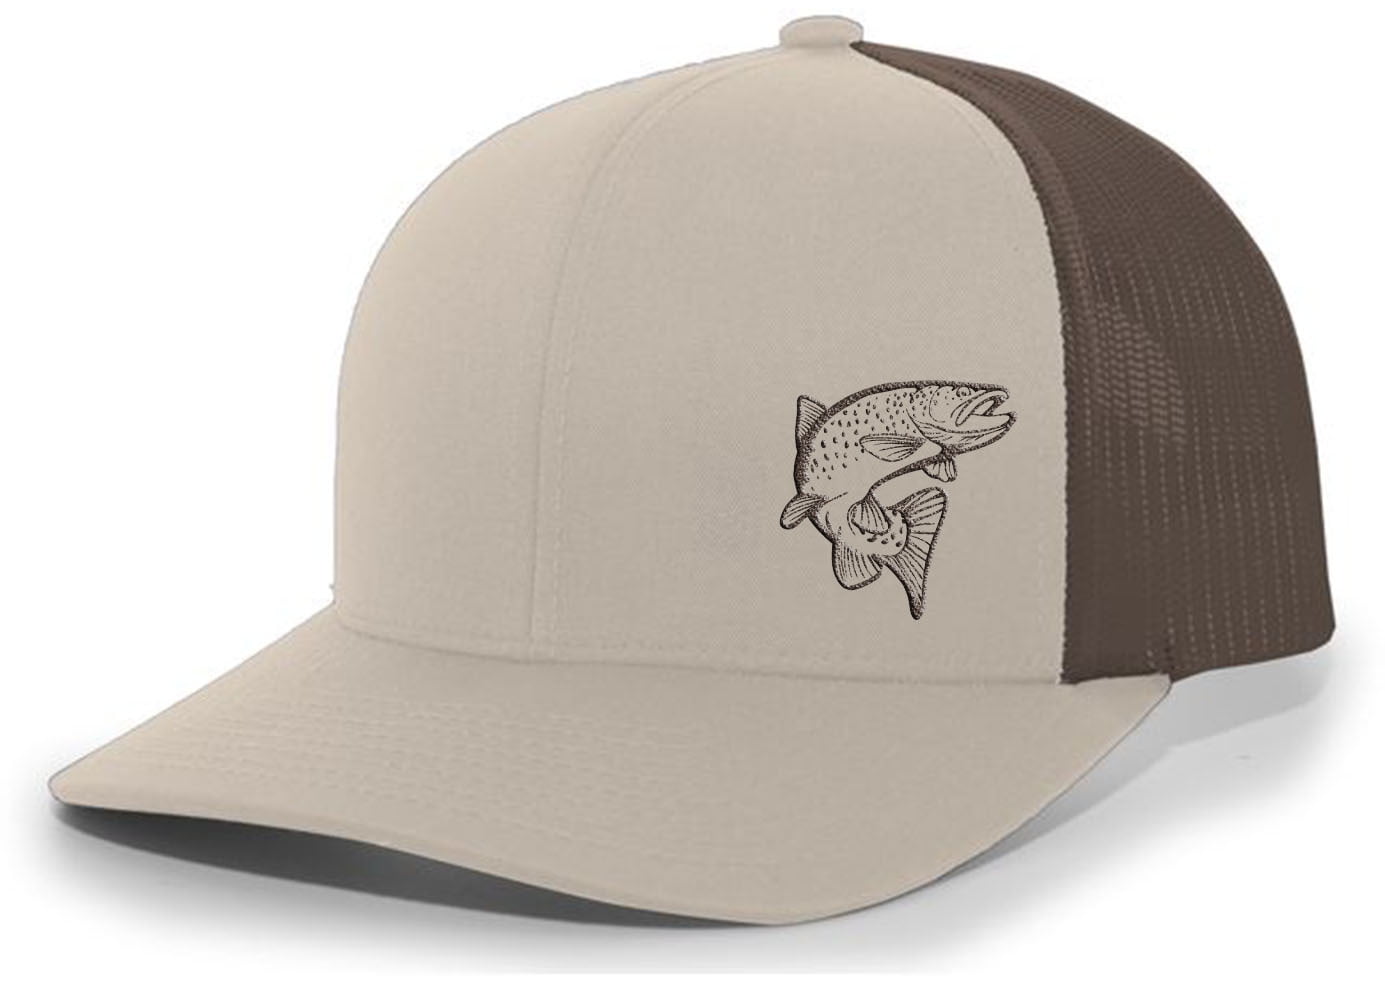 Men's Jumping Trout Fishing Embroidered Mesh Back Trucker Hat